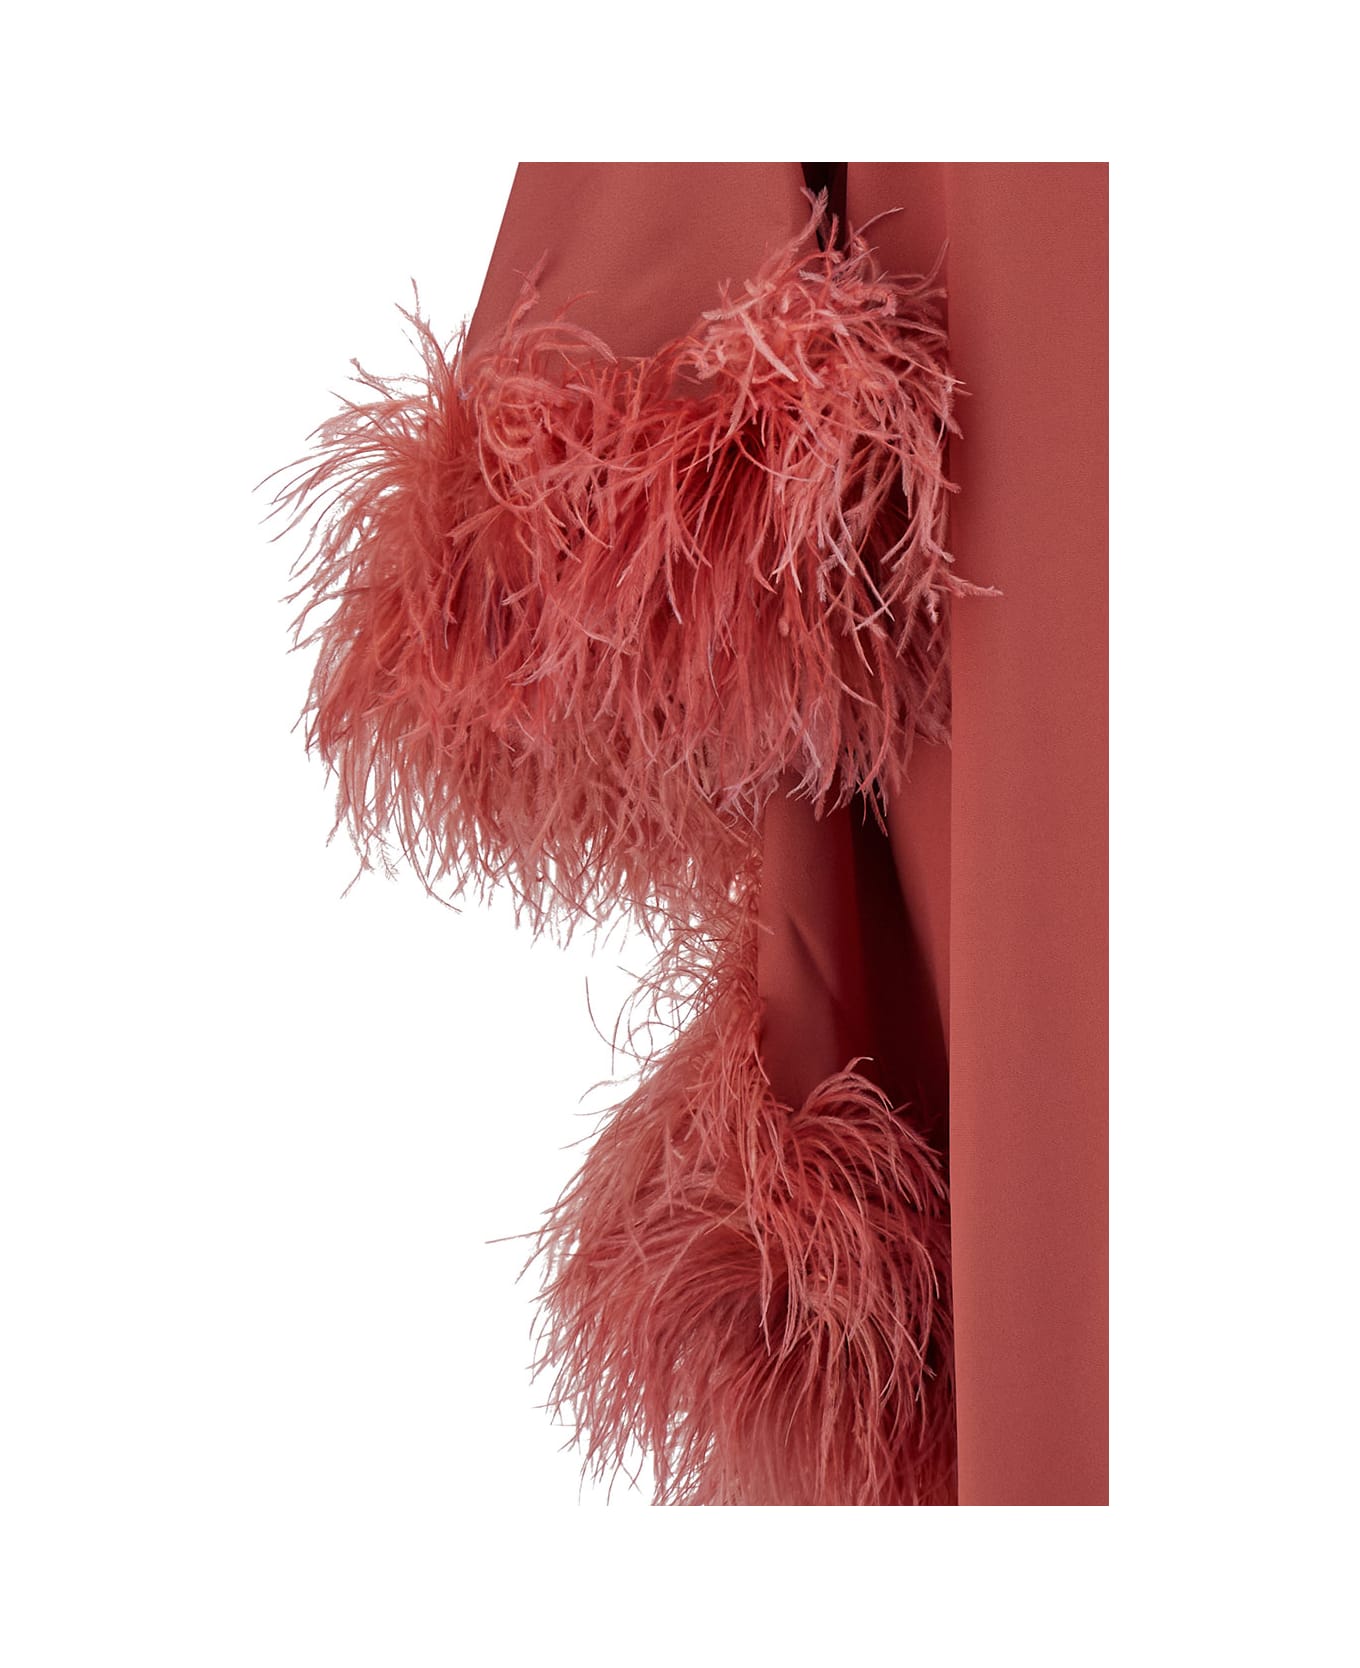 Taller Marmo Salmon Pink Dress With Tonal Feather Trim In Acetate Blend Woman - Pink